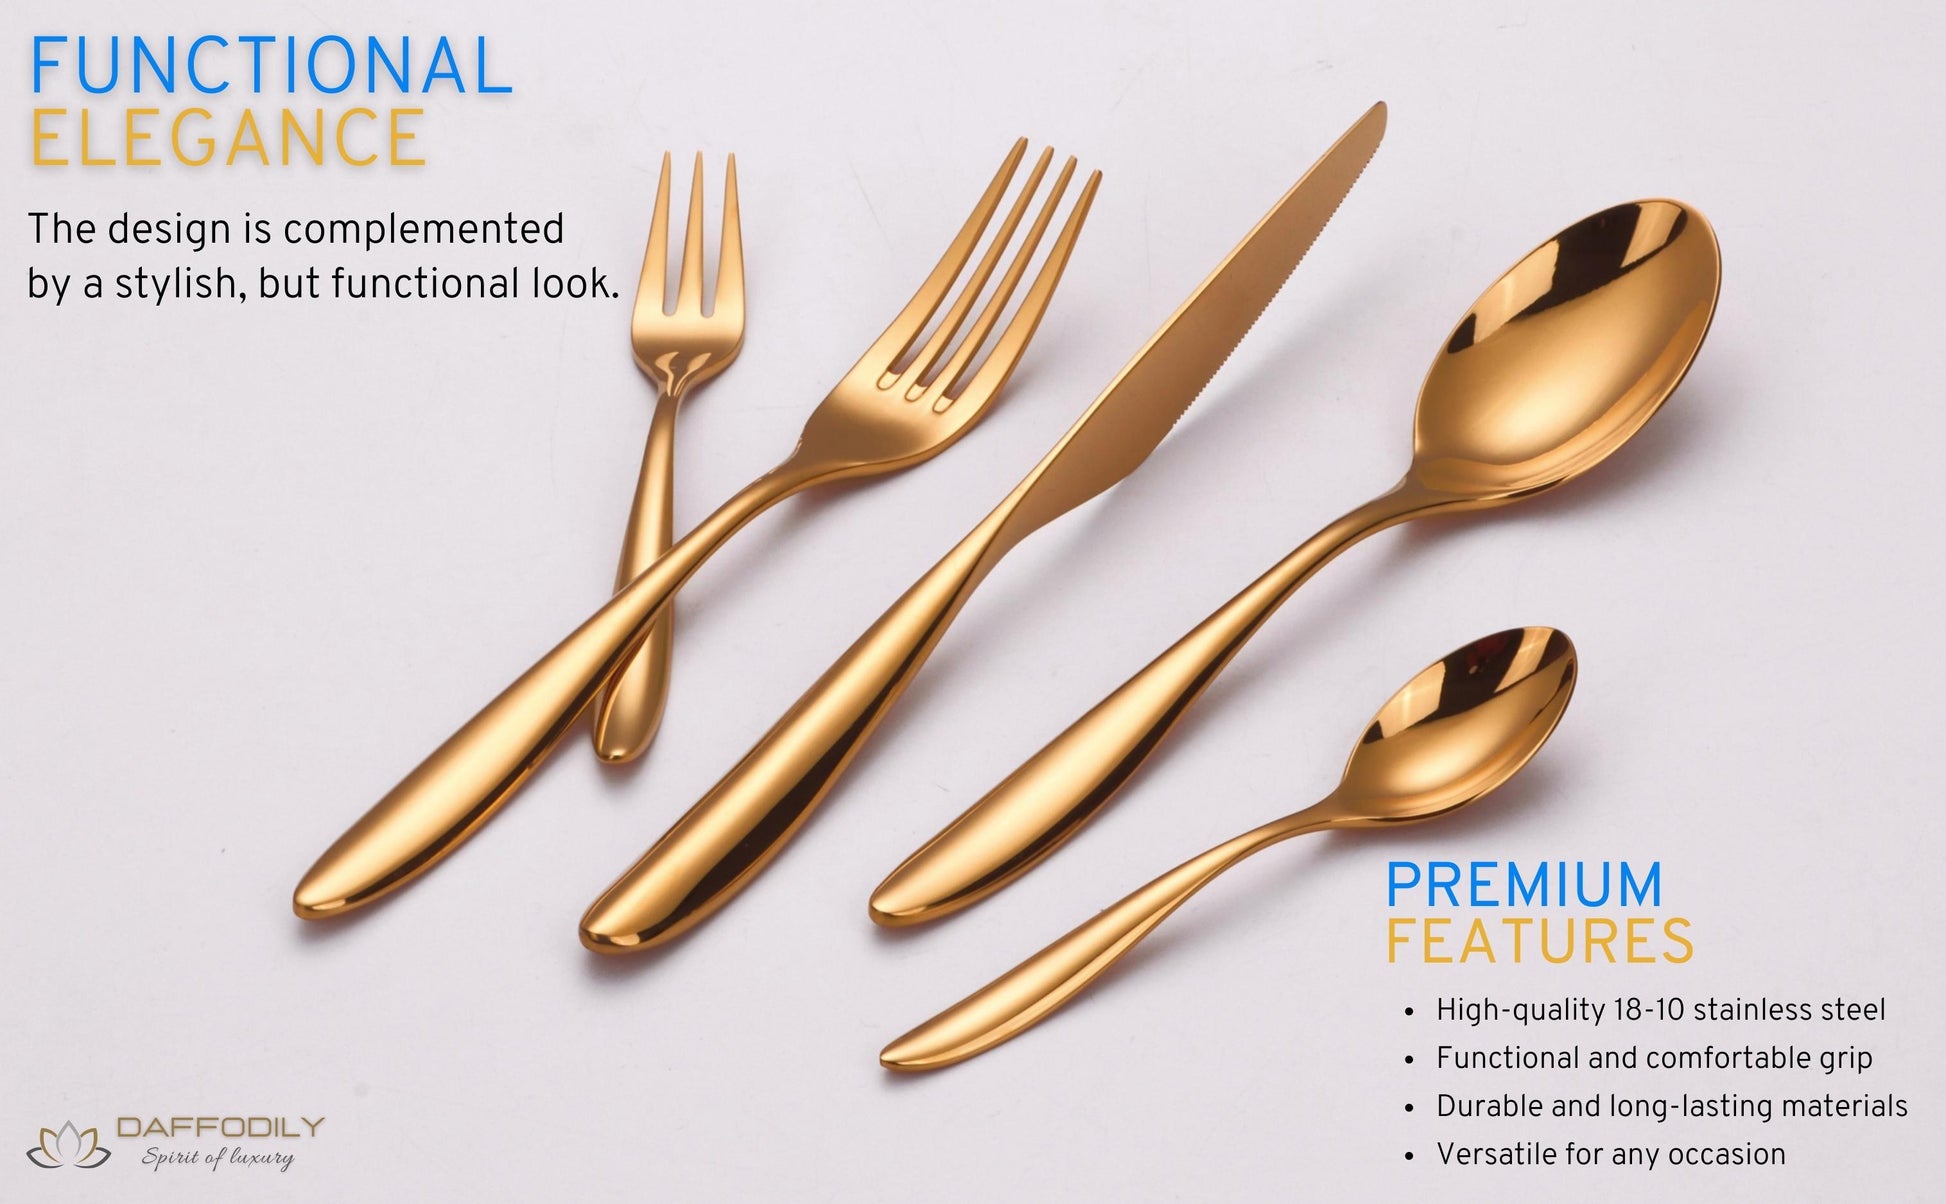 Talin Cutlery Set - Gold, Silver, Rose Gold Stainless Steel Silverware